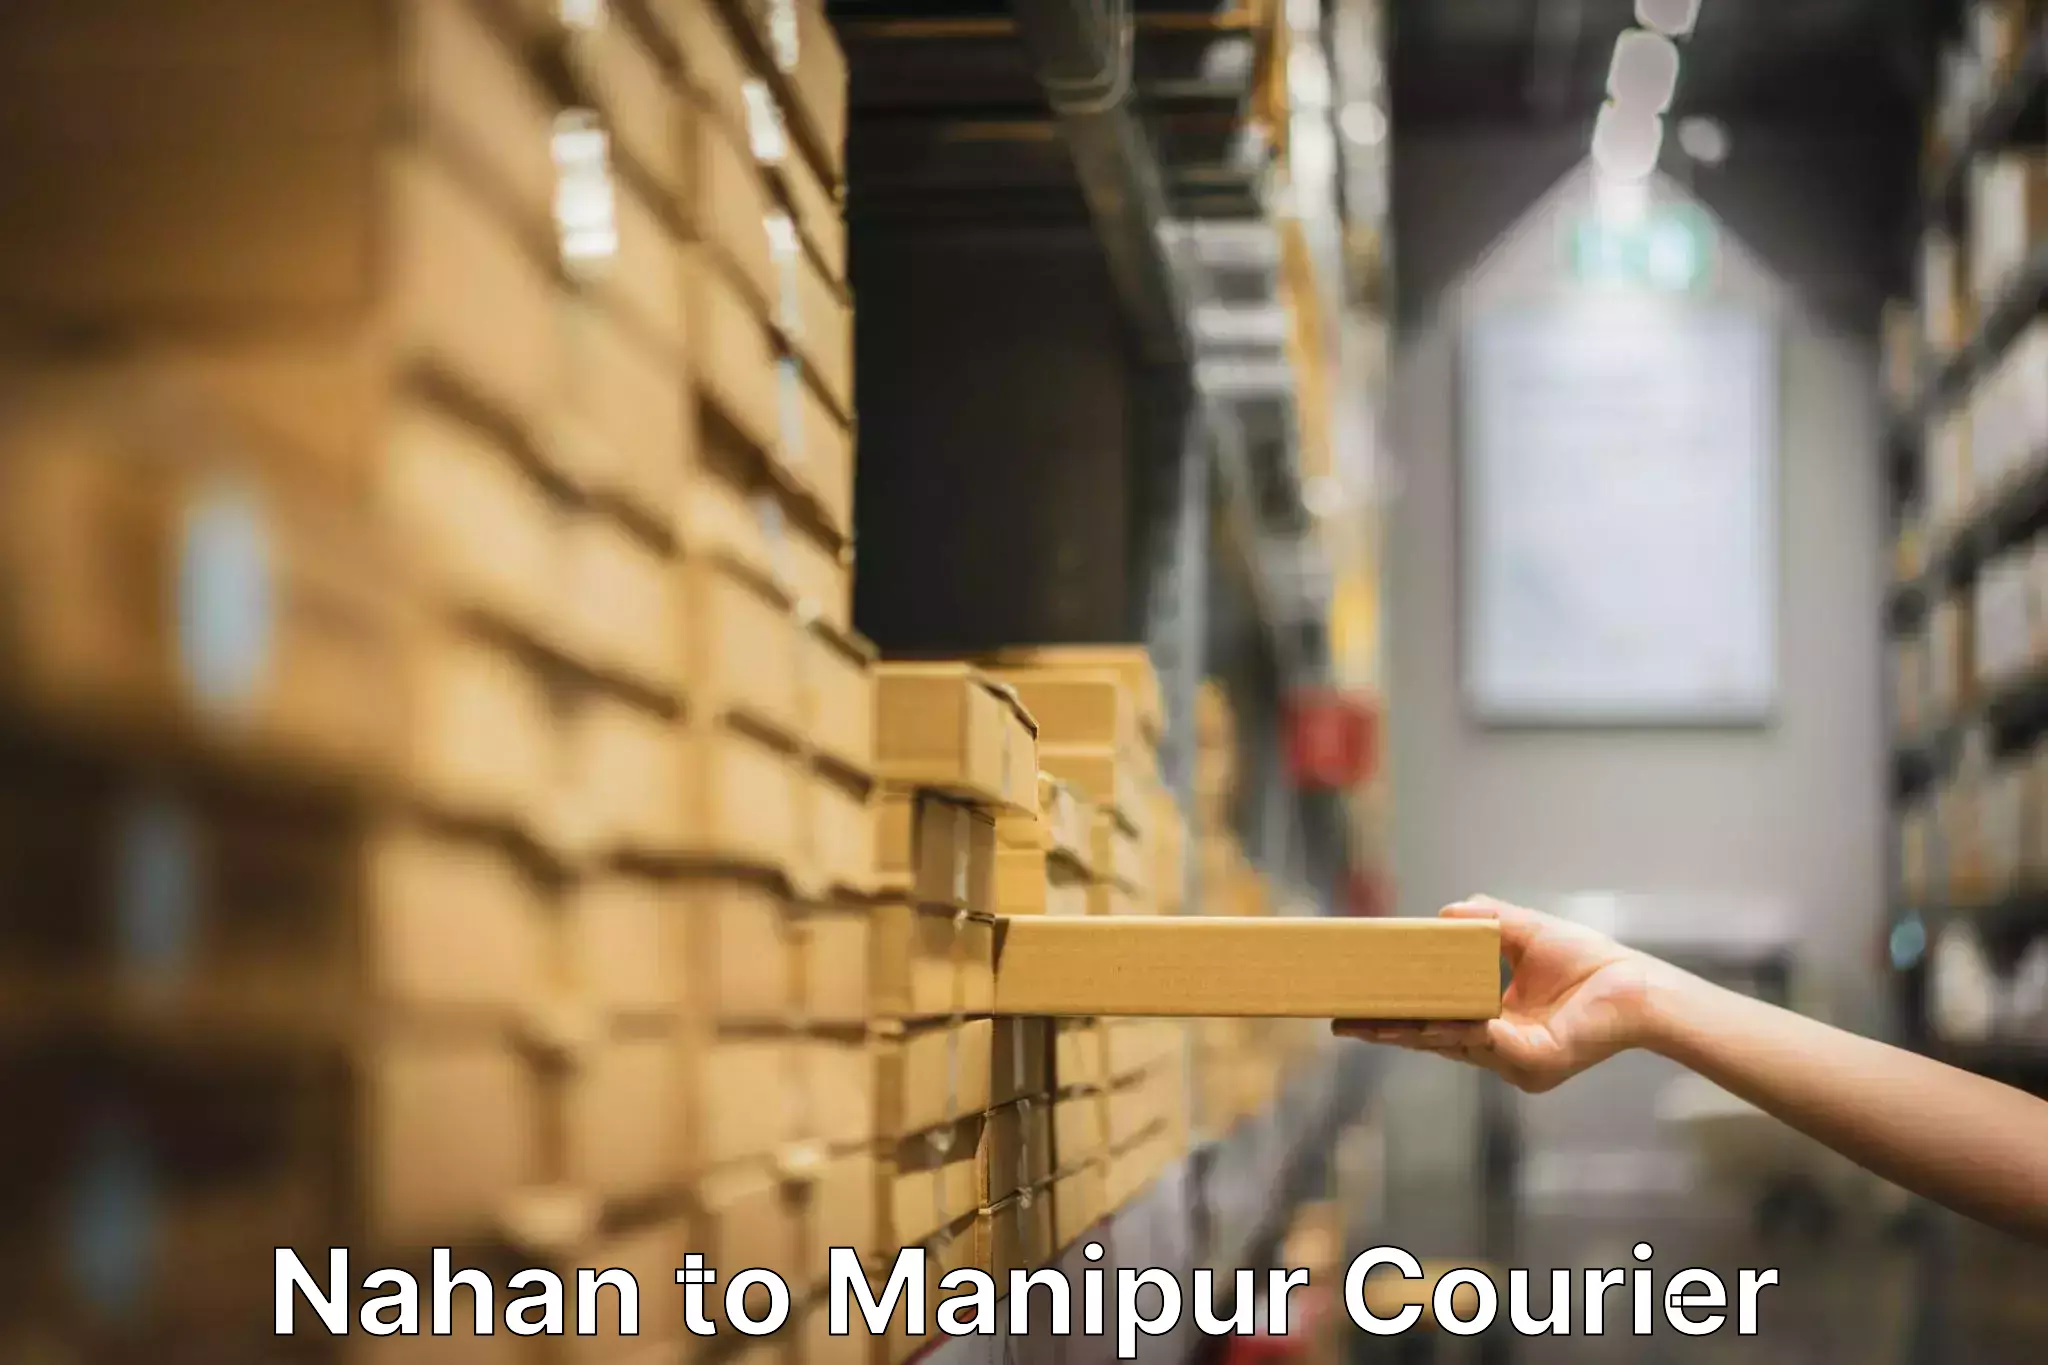 Professional moving company Nahan to Manipur